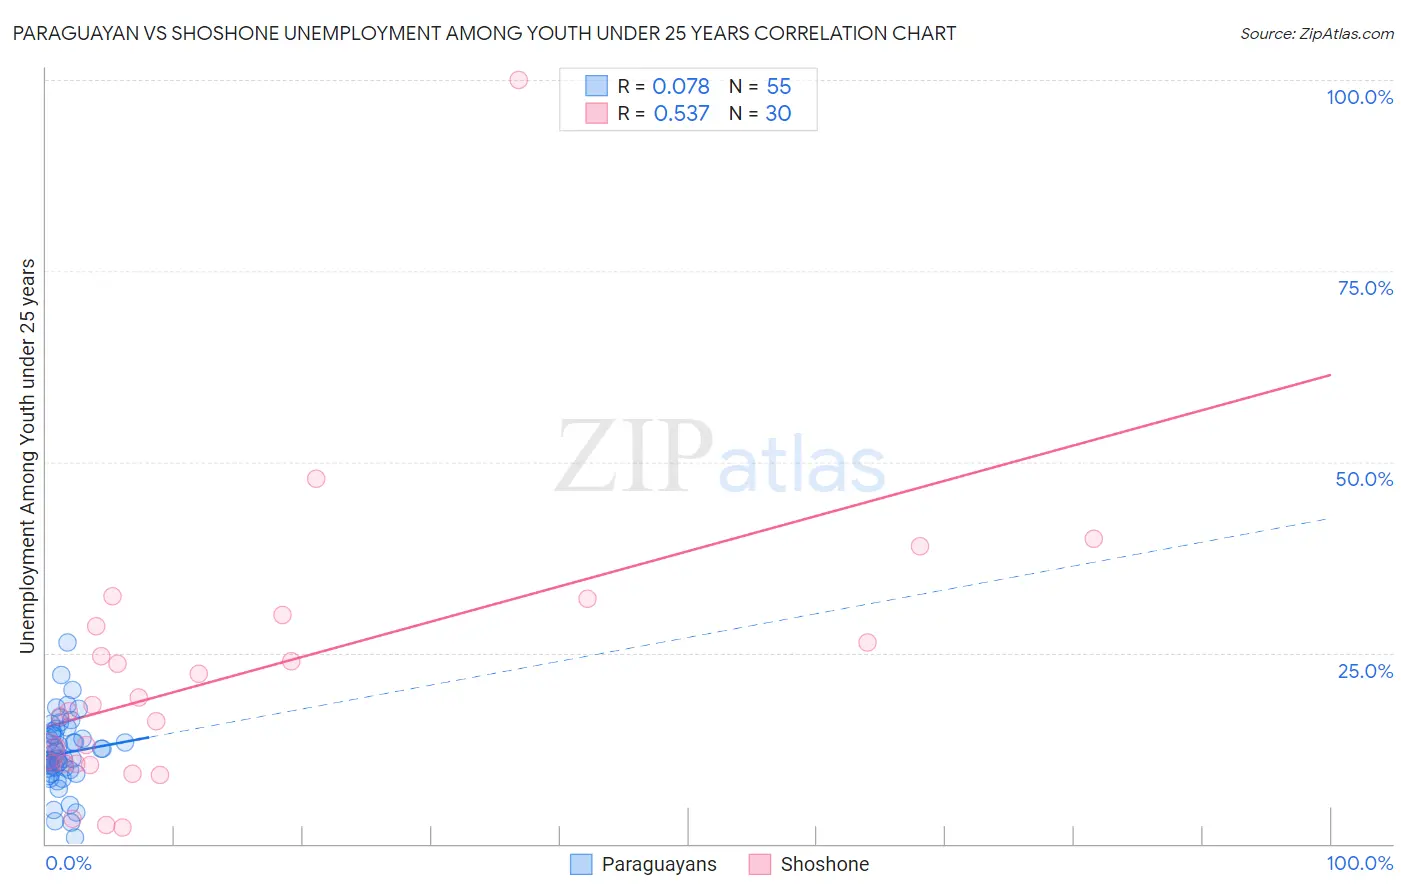 Paraguayan vs Shoshone Unemployment Among Youth under 25 years